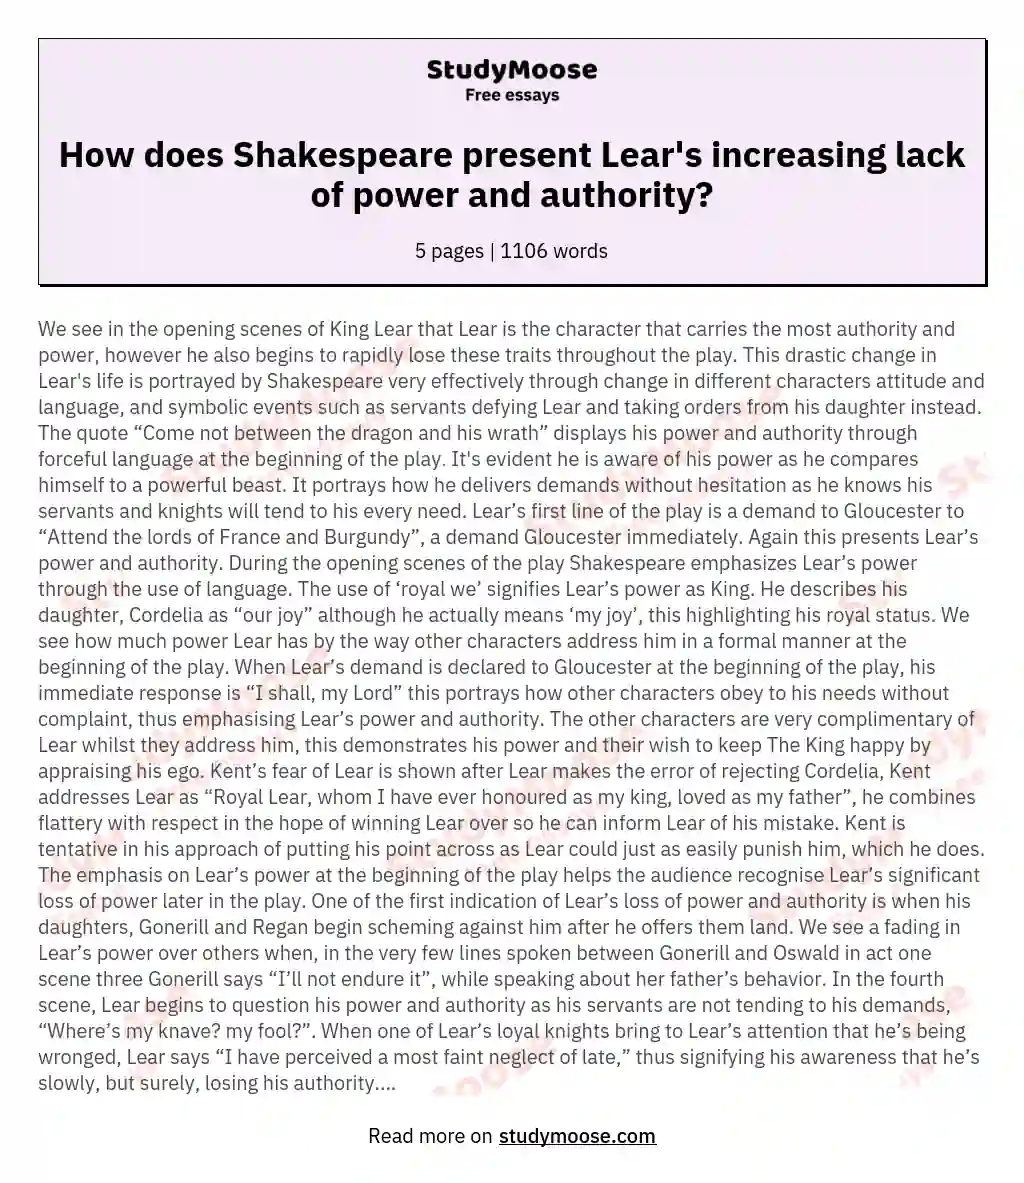 How does Shakespeare present Lear's increasing lack of power and authority? essay